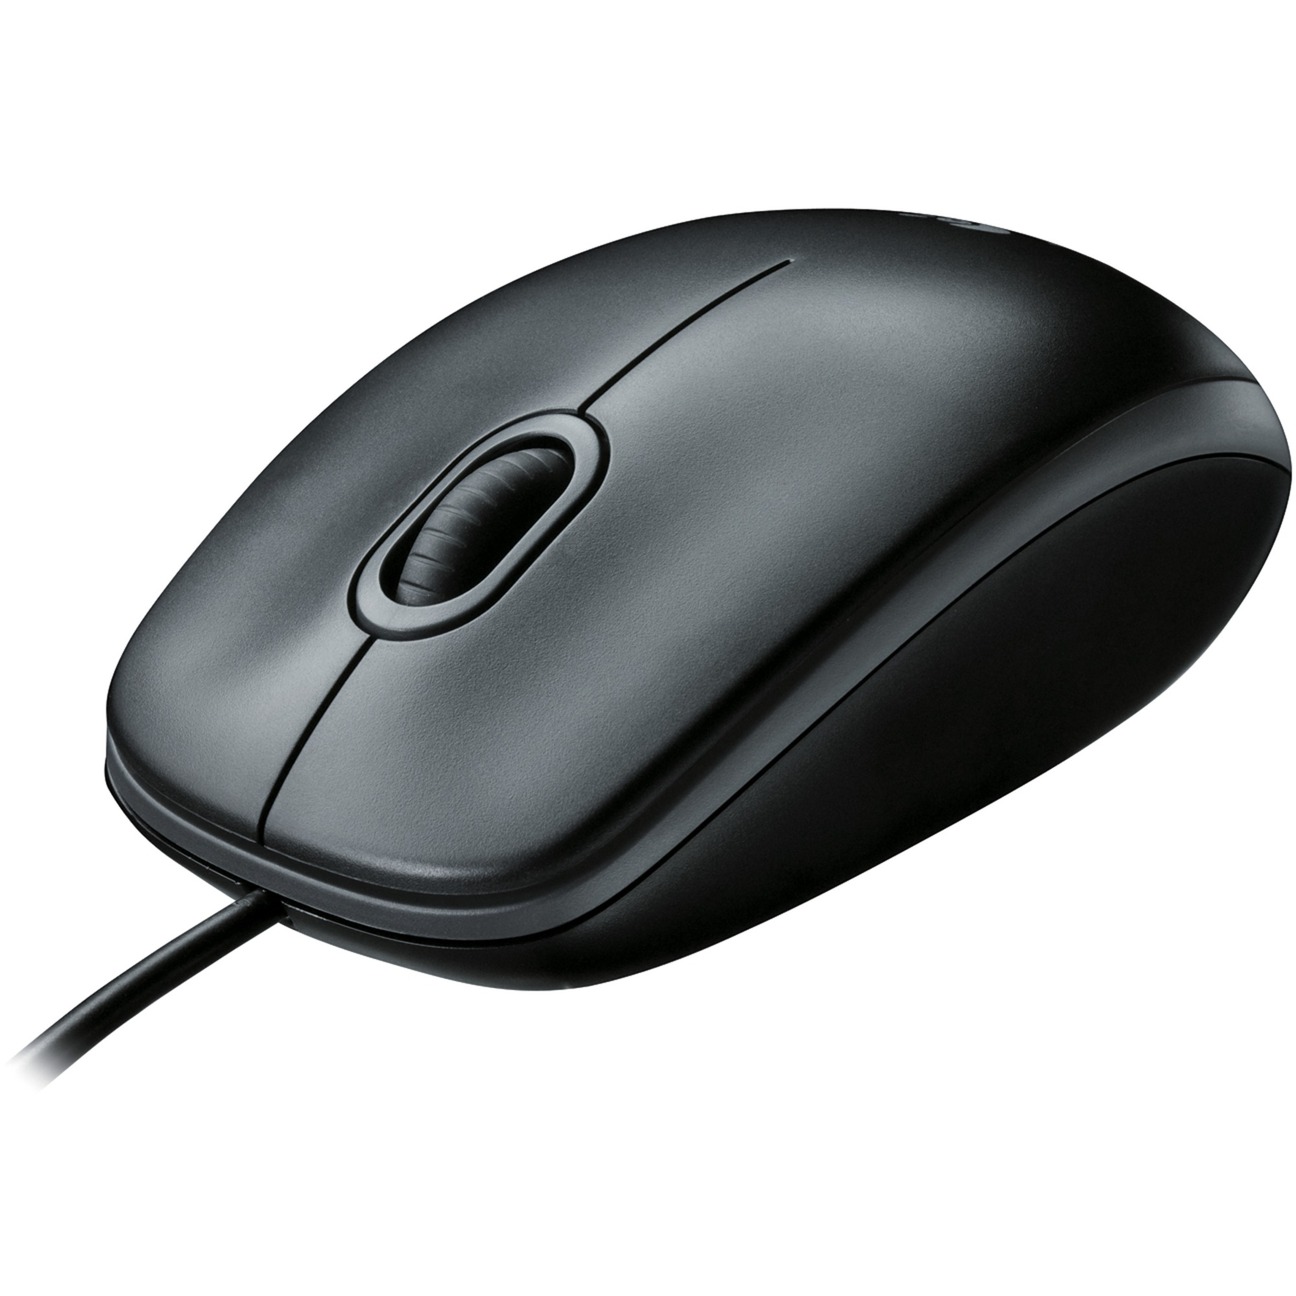 Image of Alternate - B100 Optical USB Mouse for Business, Maus online einkaufen bei Alternate